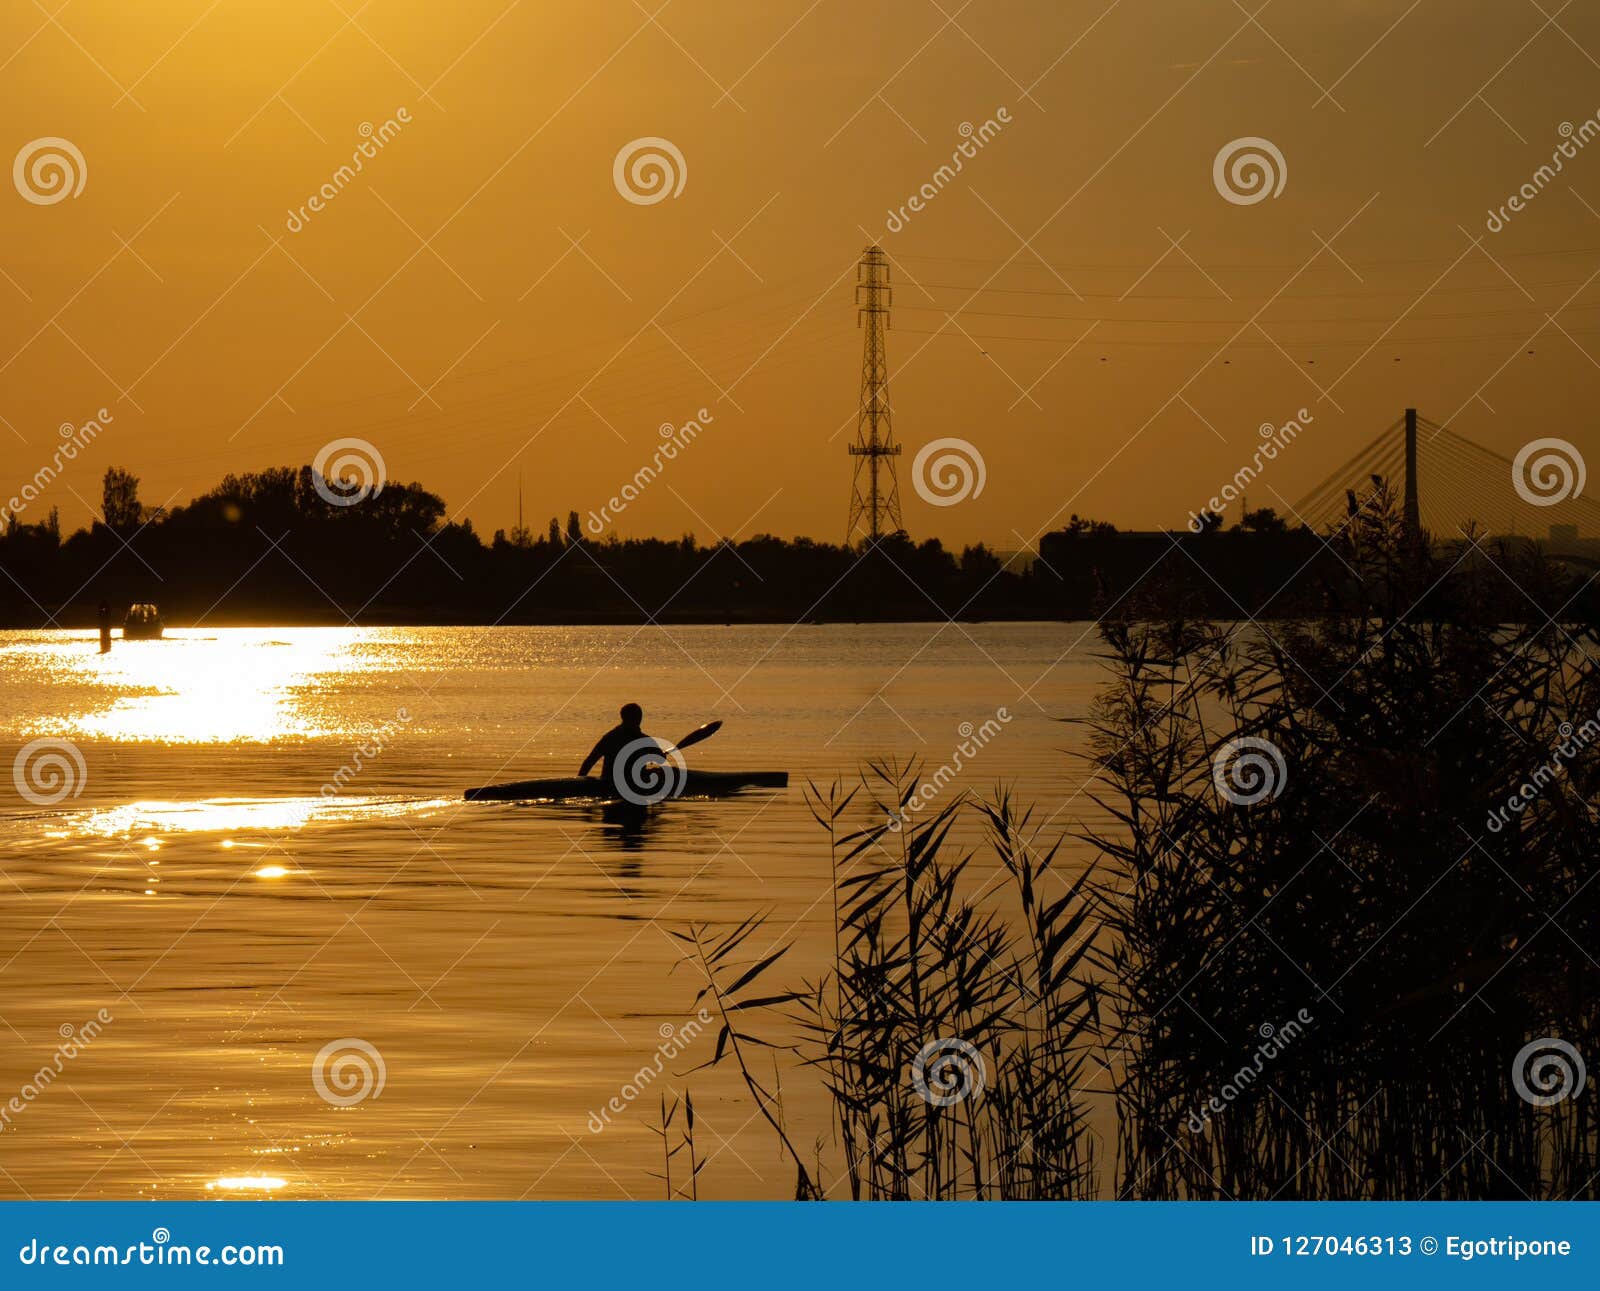 woman canoeing at sunset on vistula river, poland. amazing scenery and colors.